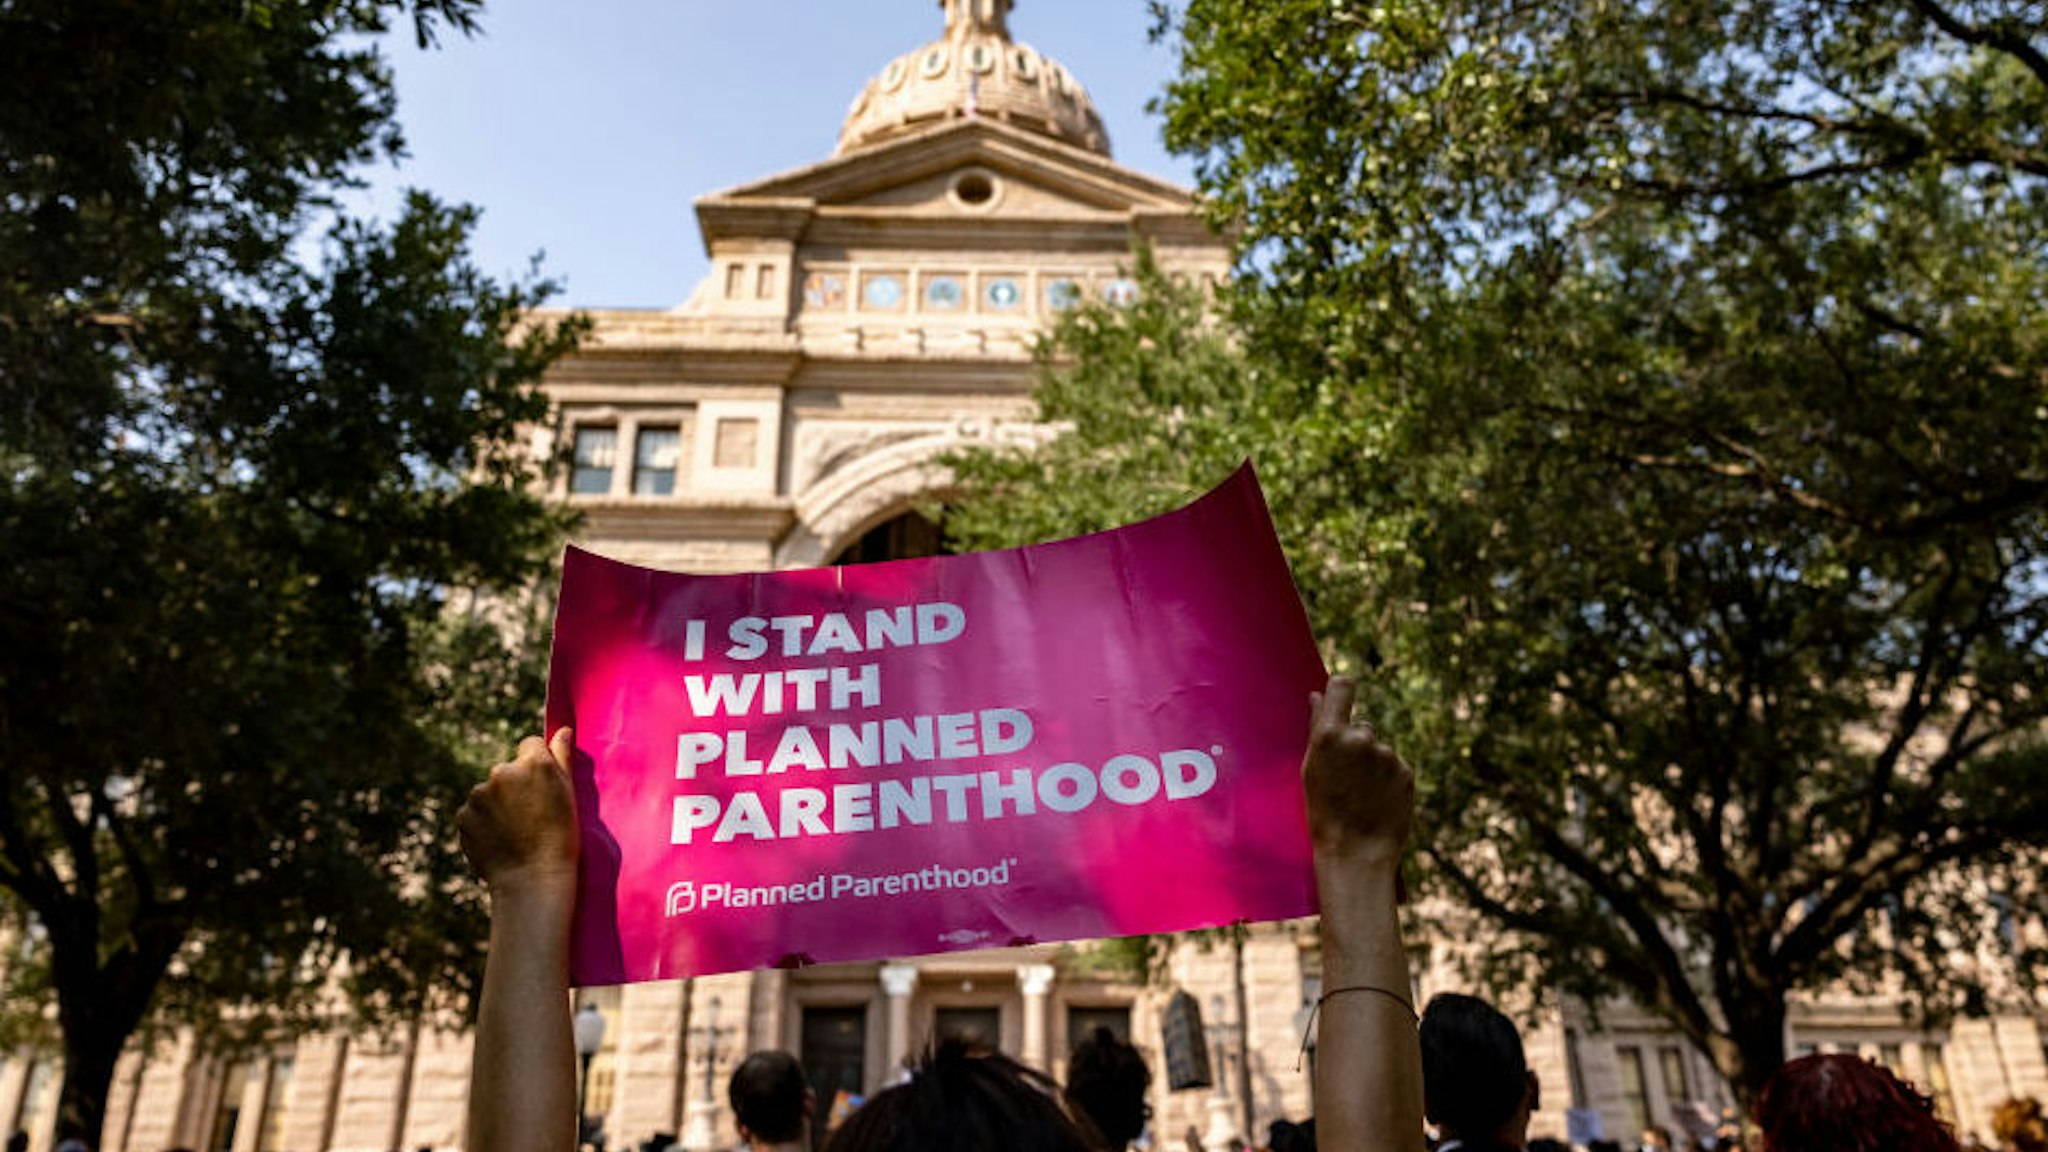 AUSTIN, TX - SEPTEMBER 11: An abortion rights activist holds a sign in support of Planned Parenthood at a rally at the Texas State Capitol on September 11, 2021 in Austin, Texas. Texas Lawmakers recently passed several pieces of conservative legislation, including SB8, which prohibits abortions in Texas after a fetal heartbeat is detected on an ultrasound, usually between the fifth and sixth weeks of pregnancy.